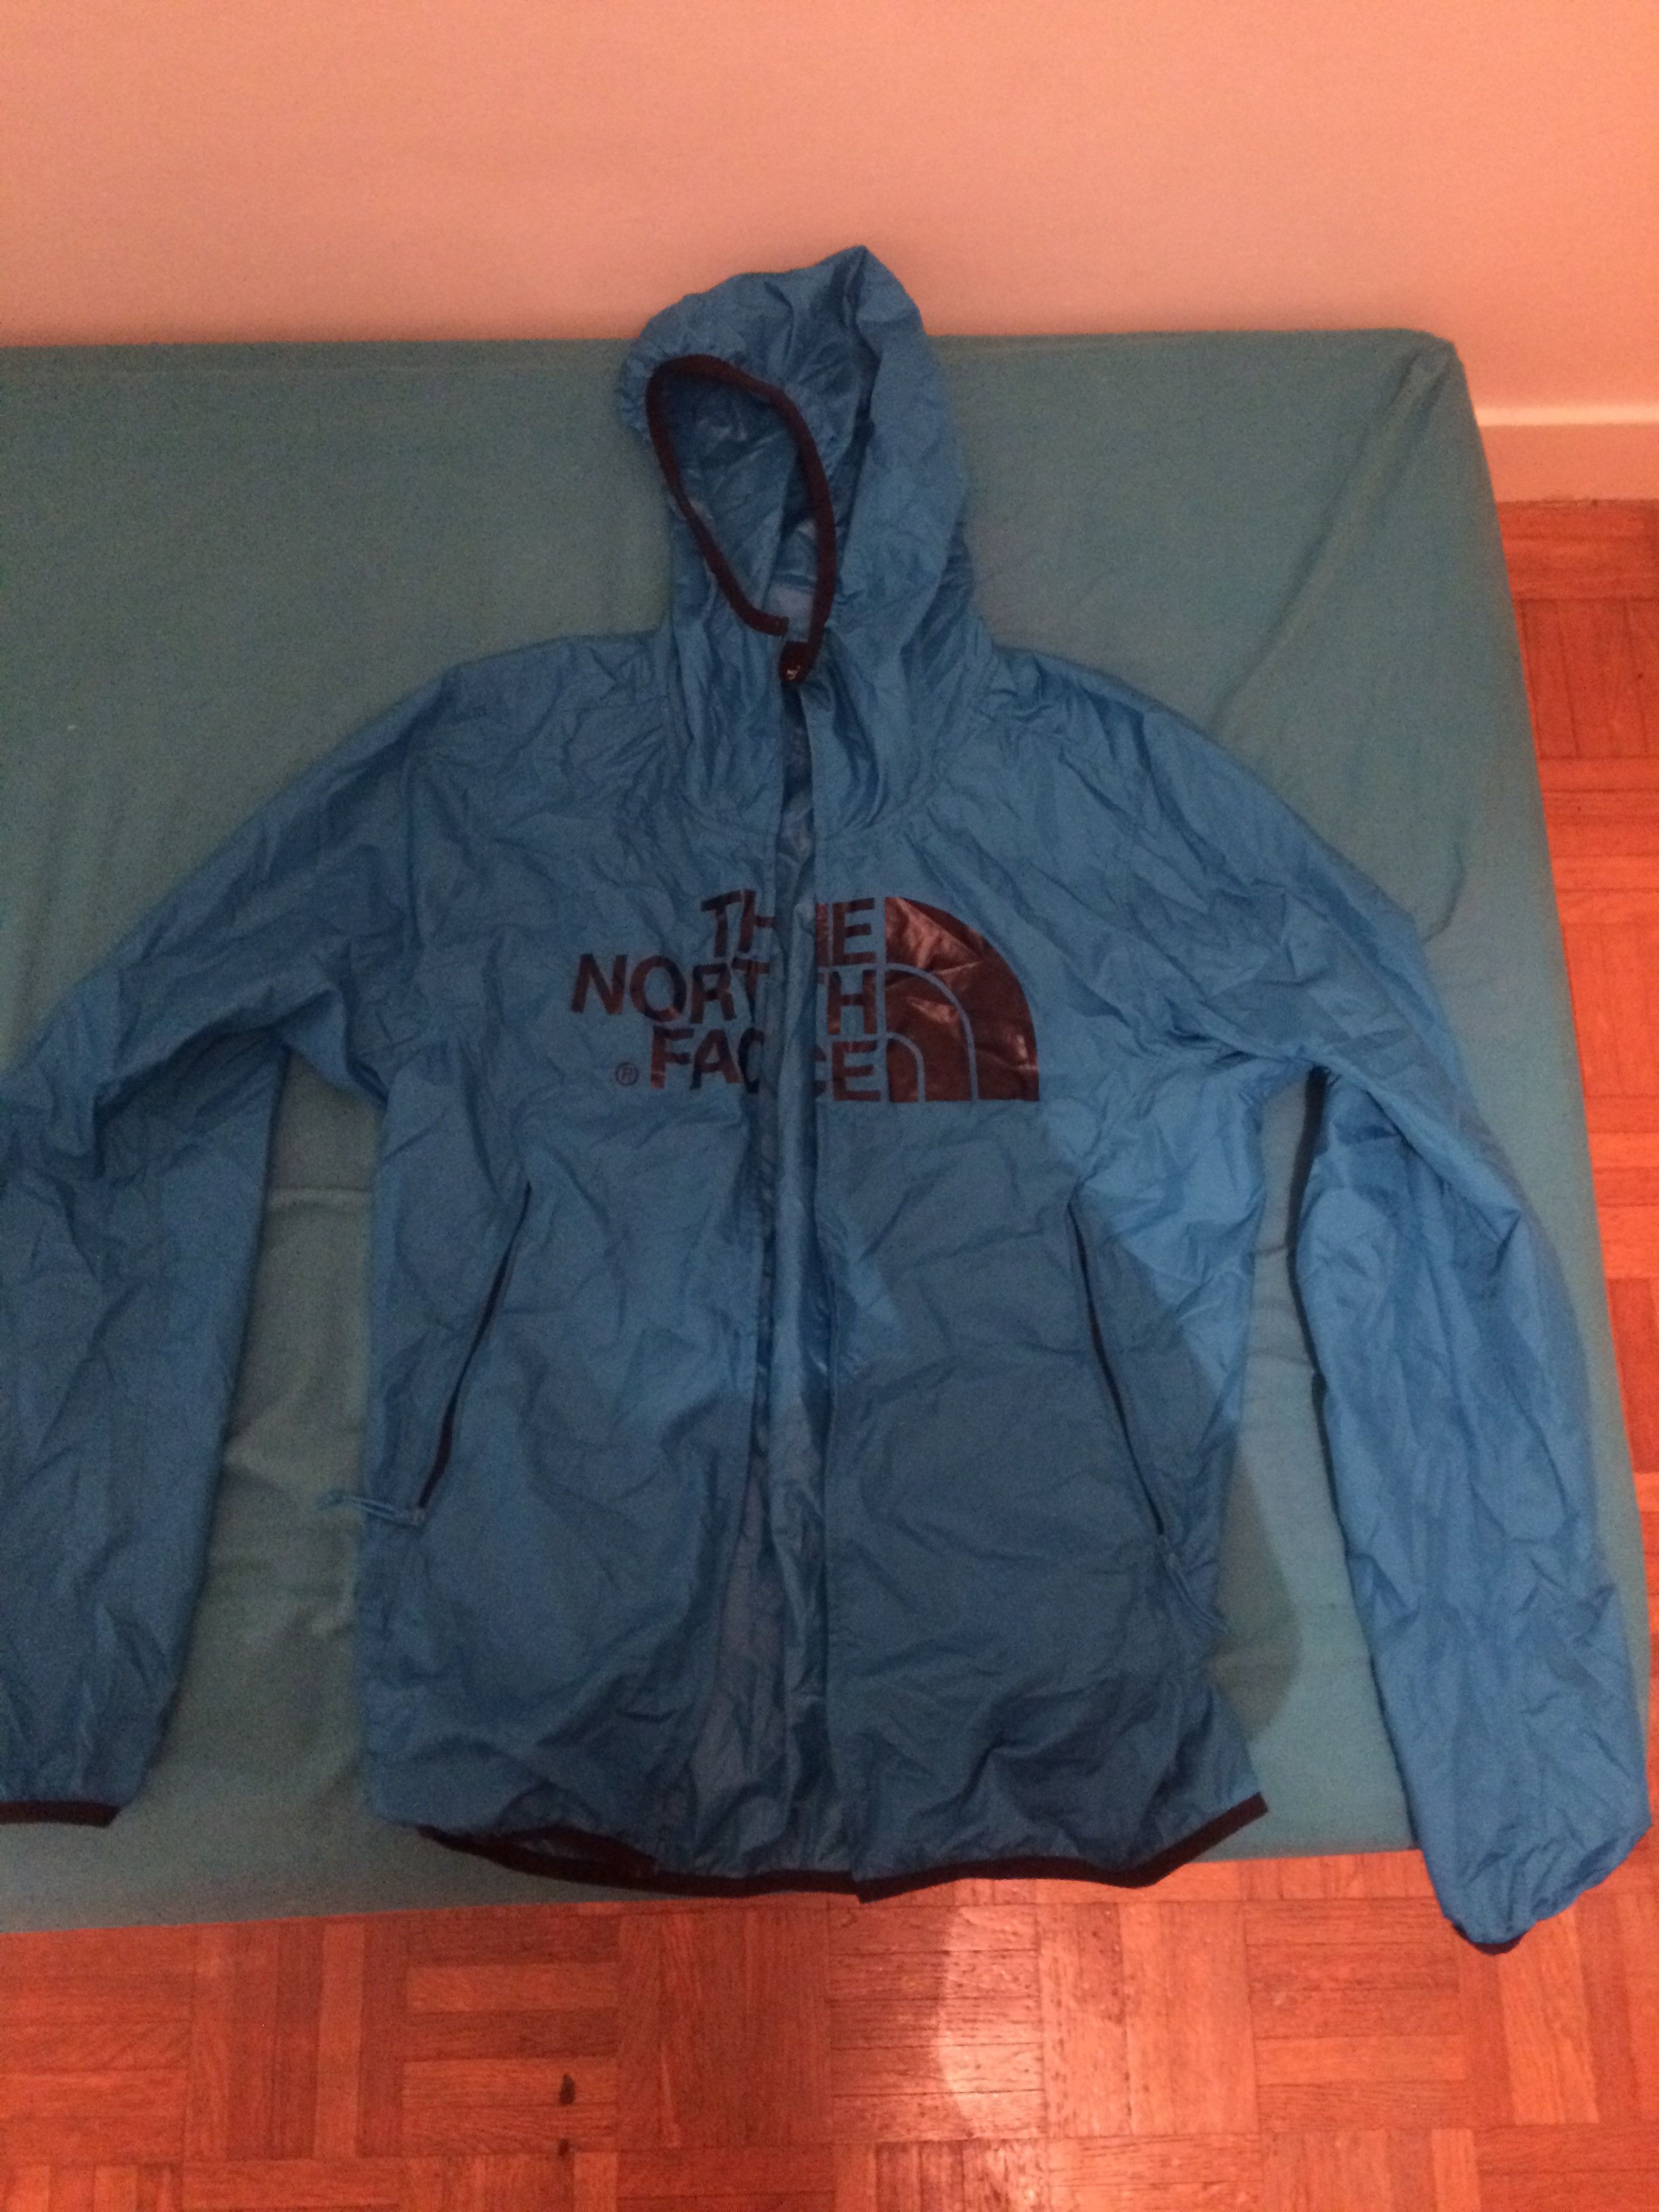 The North Face kway th north face | Grailed